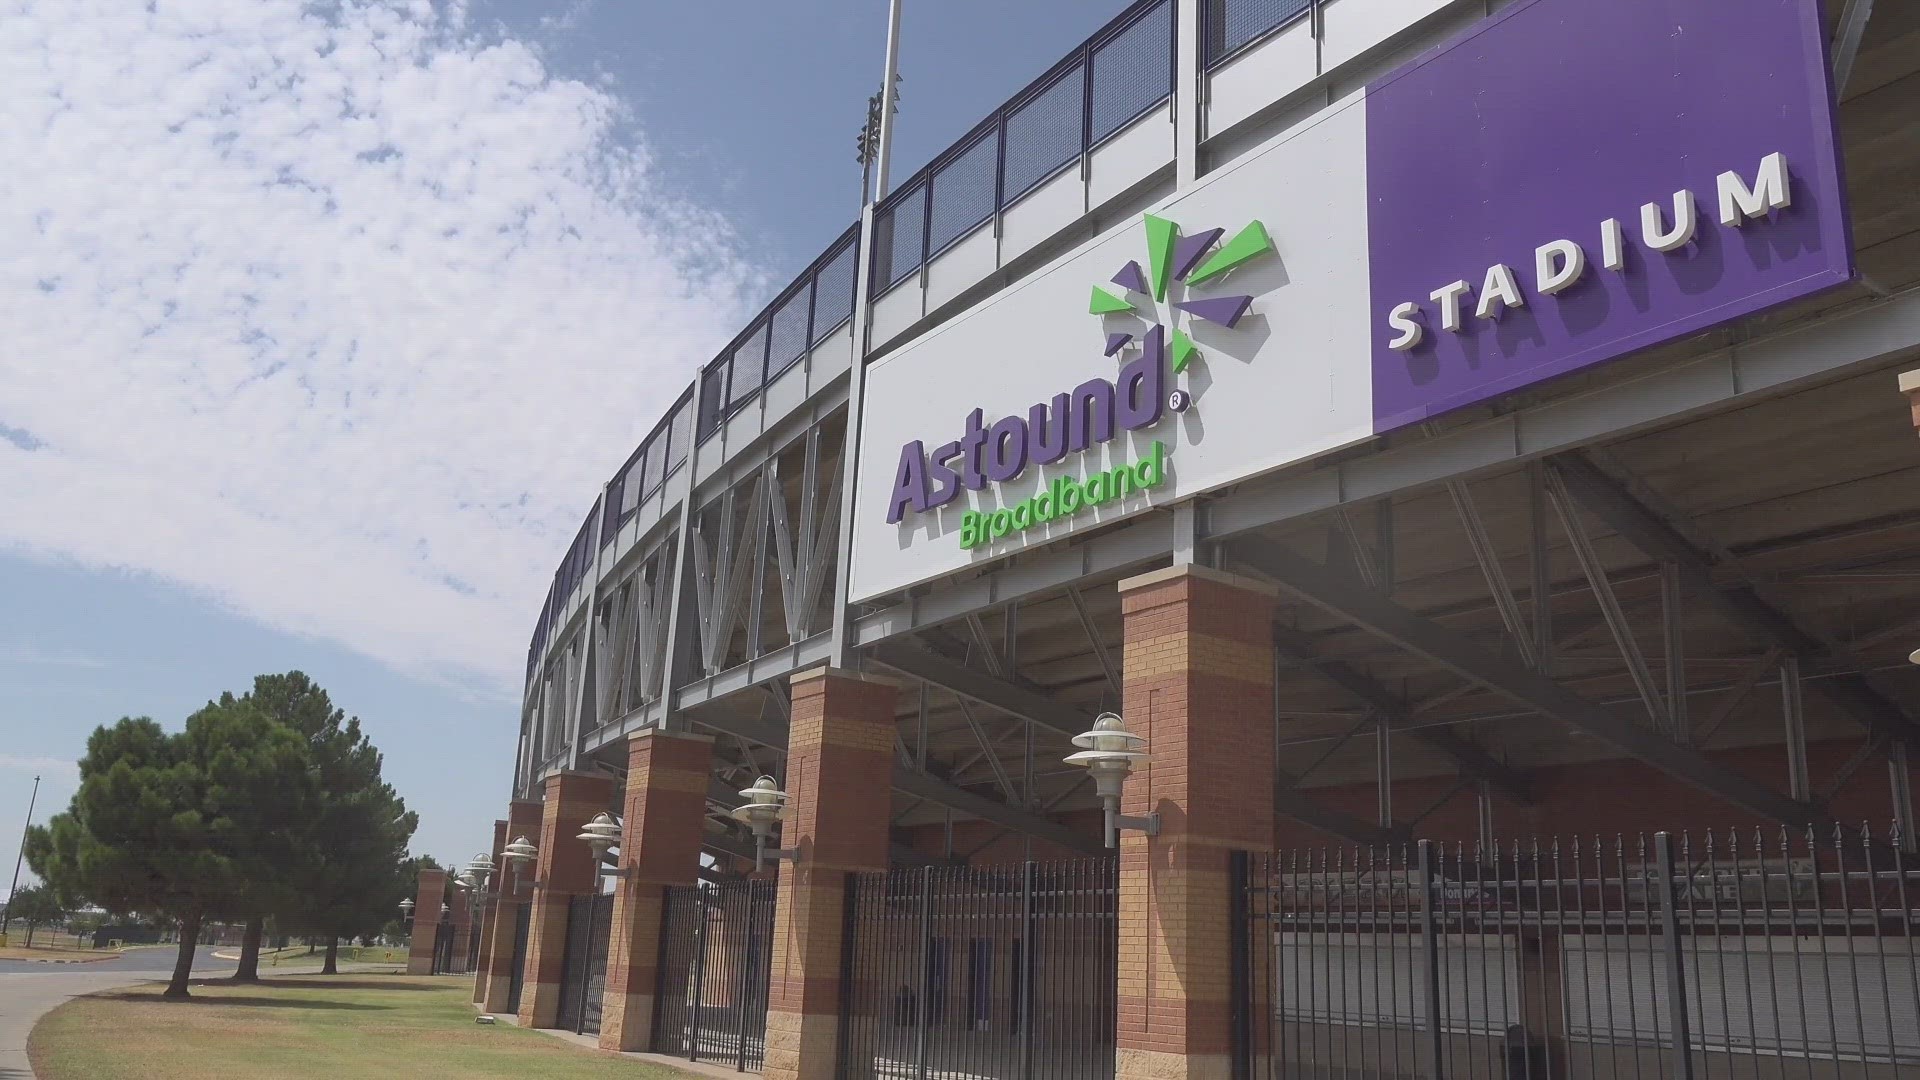 Conversations were had between the City of Midland and MISD where an offer for Astound Stadium was suggested.